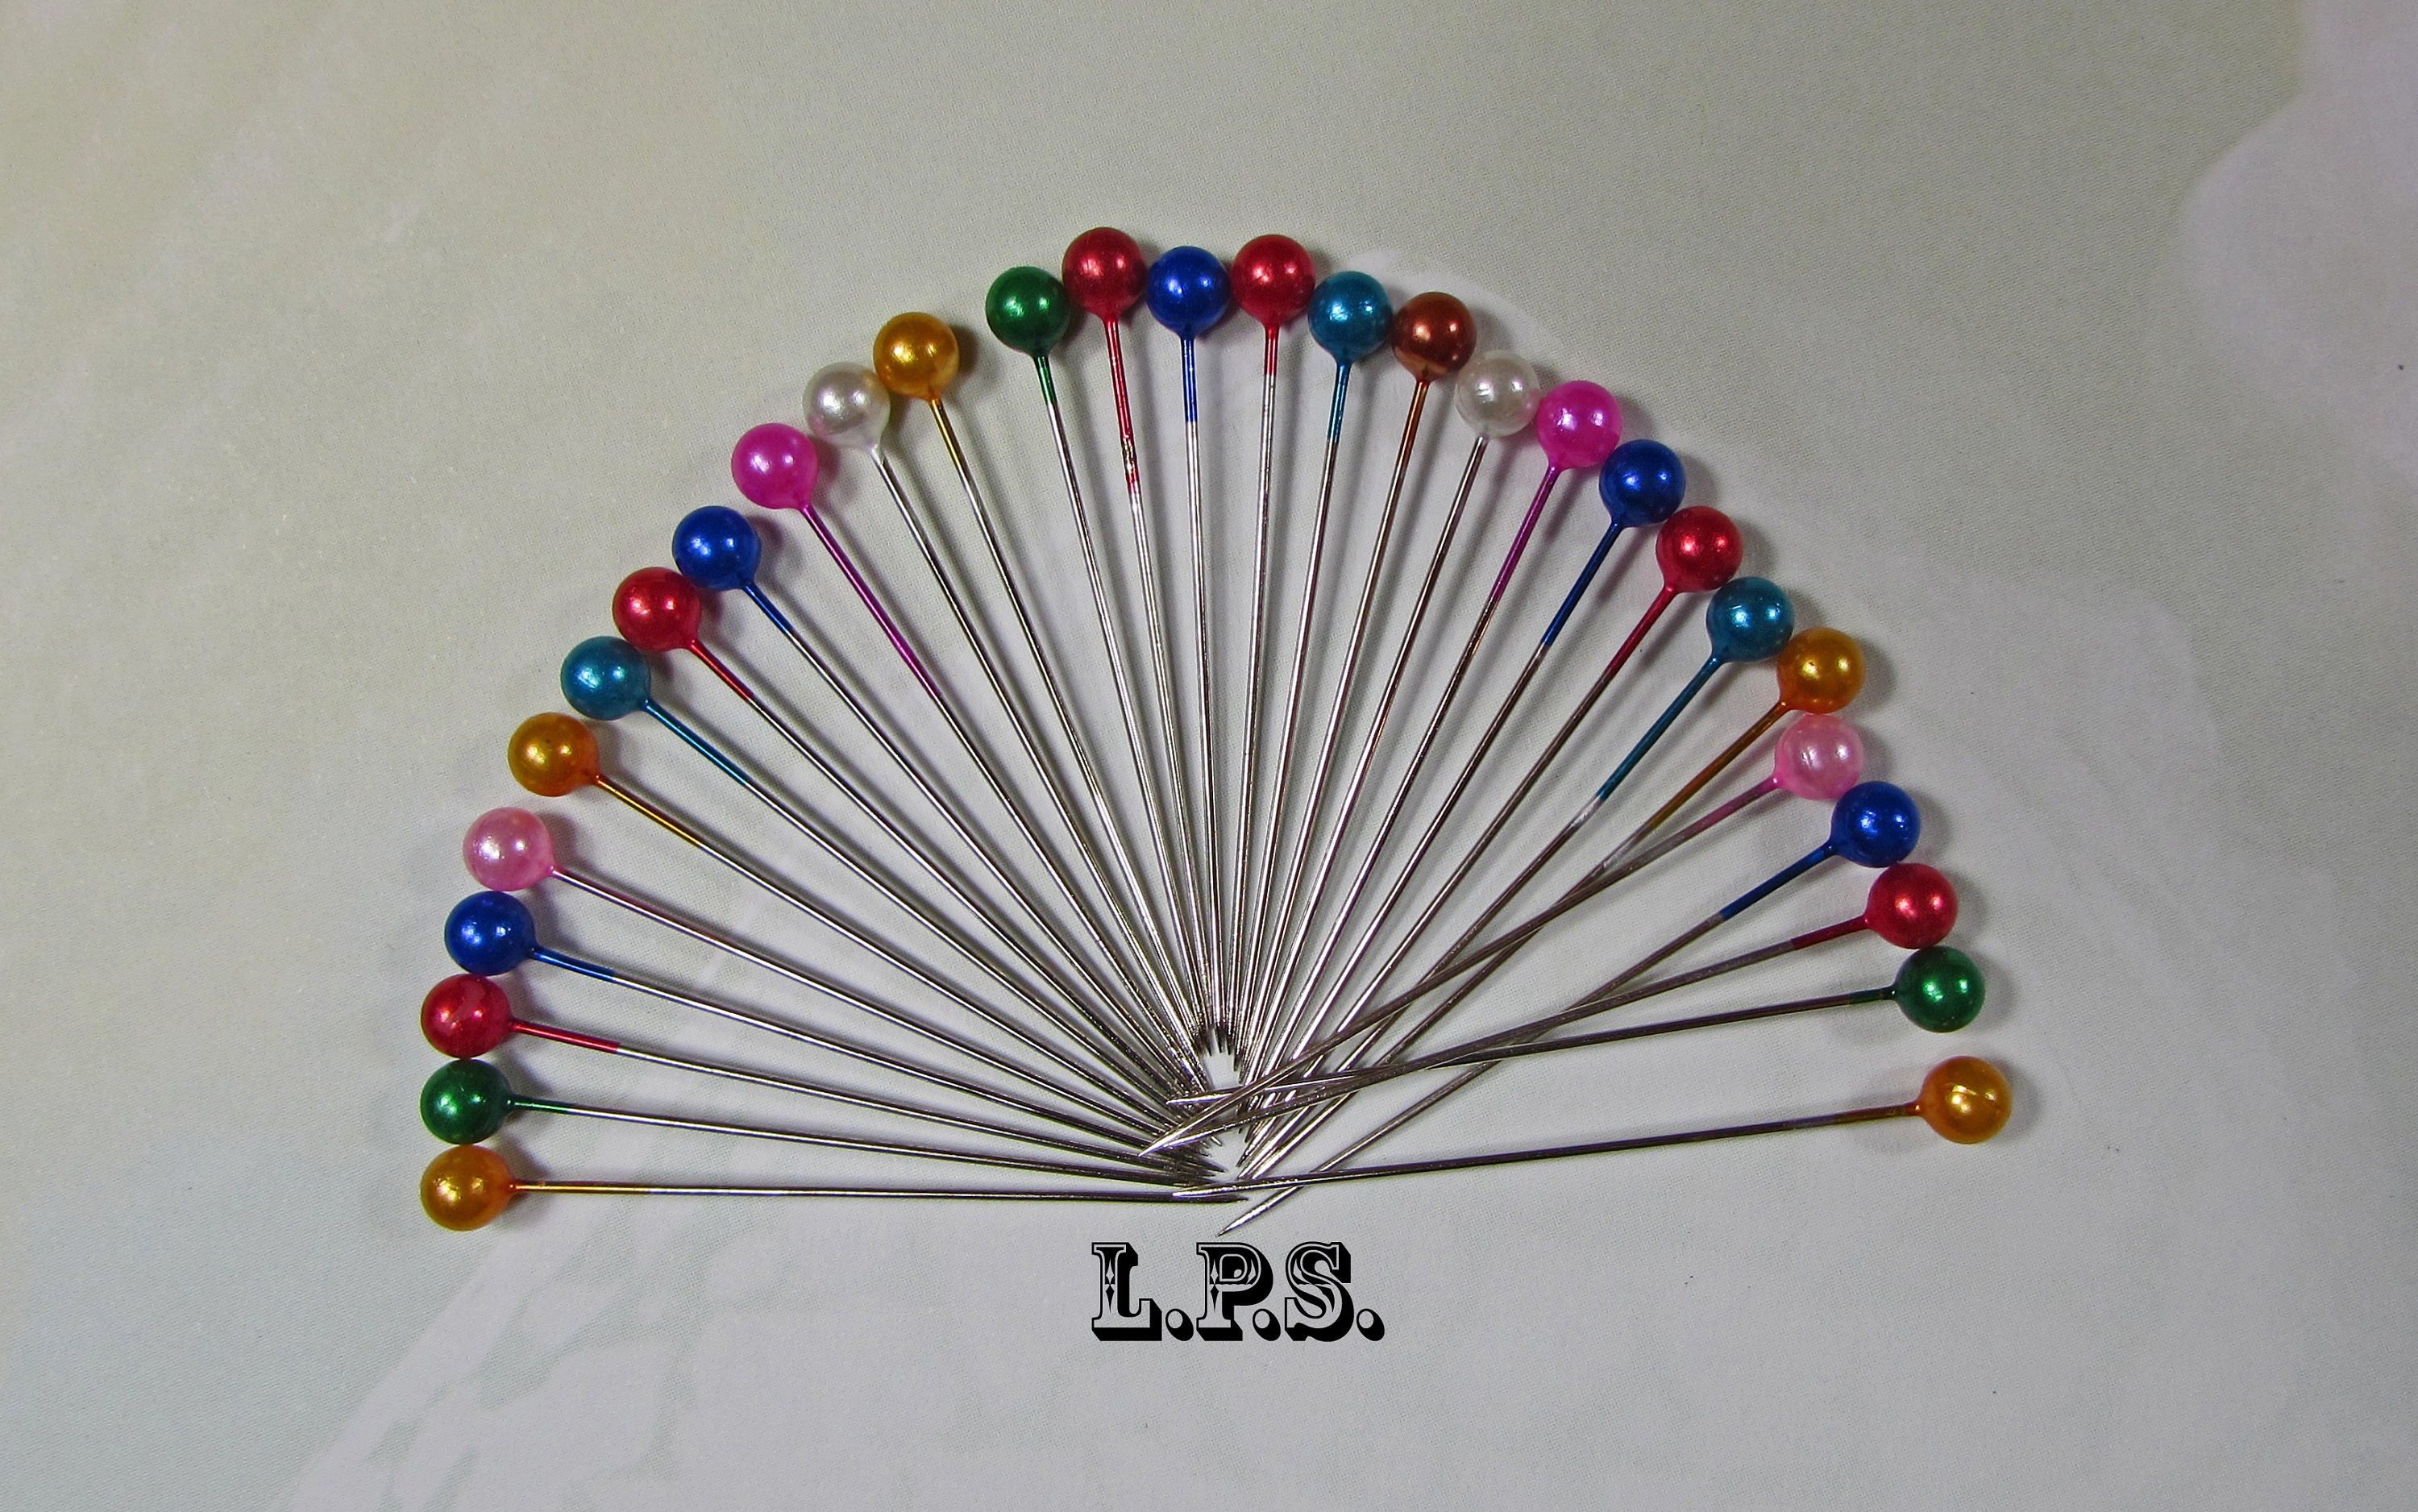 Sewing Pins, 200 Glass Head Pins in Container, Colorful Ball